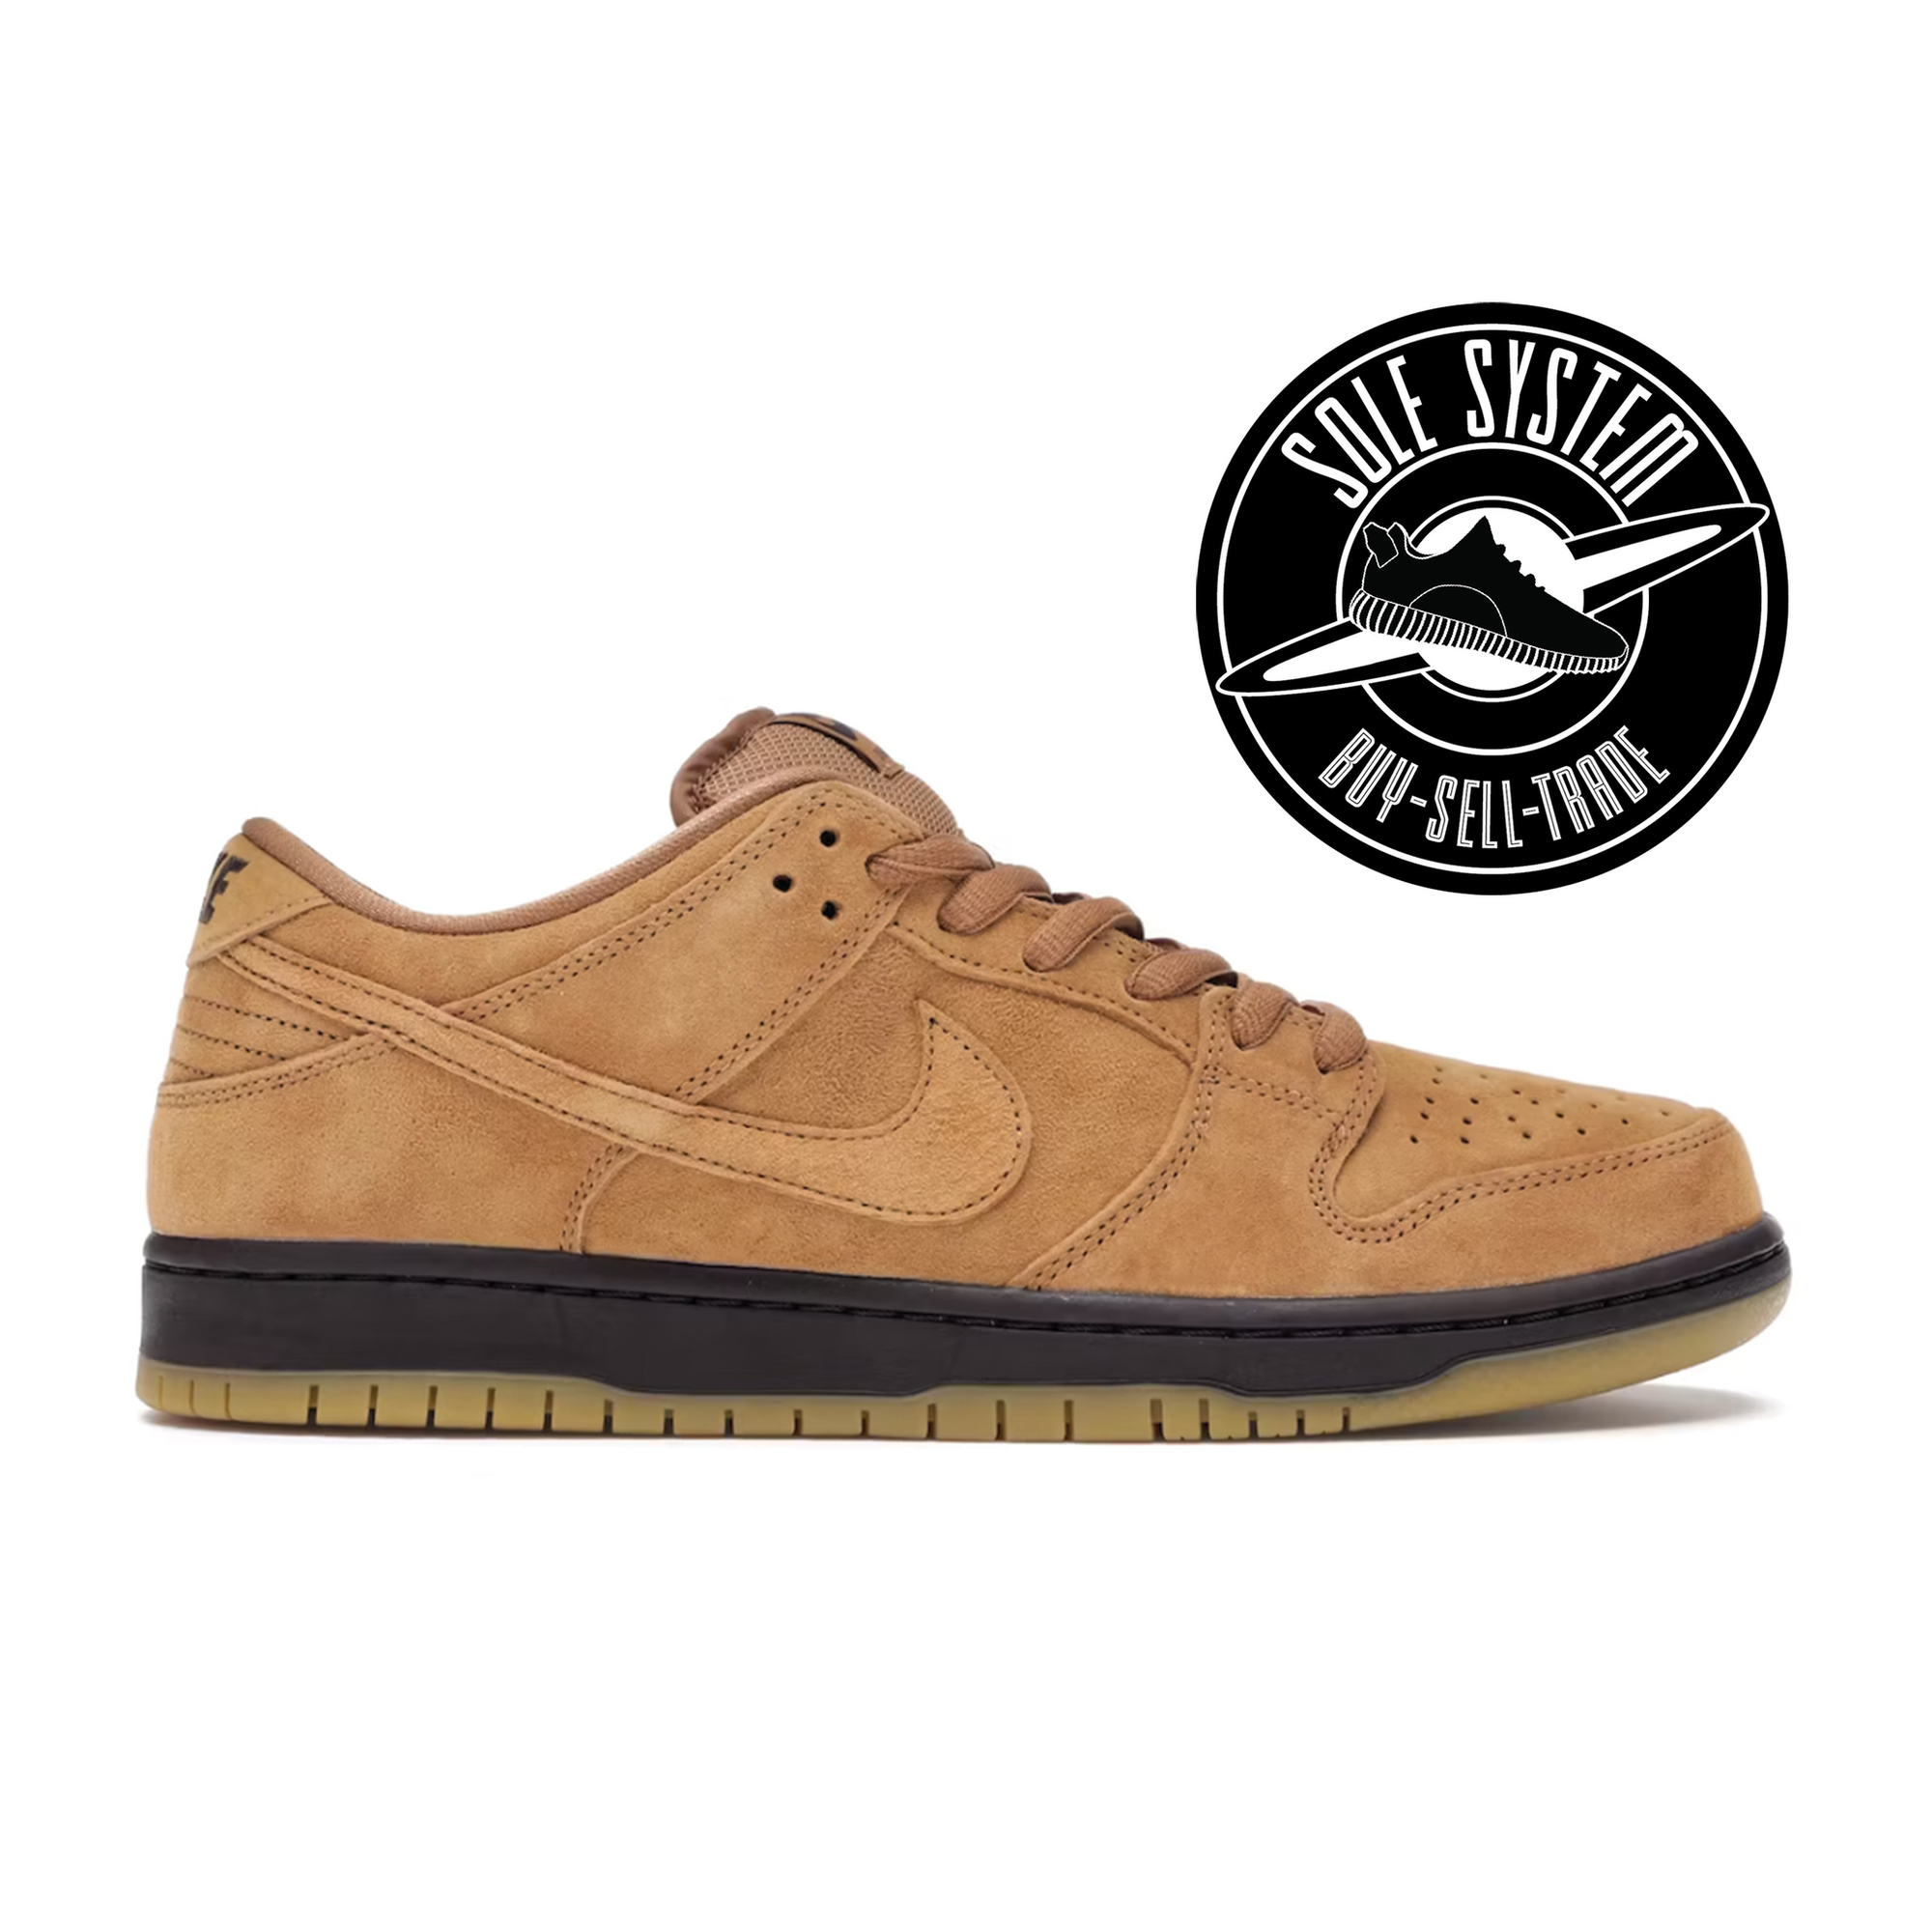 Nike SB Dunk Low Wheat - Sole System